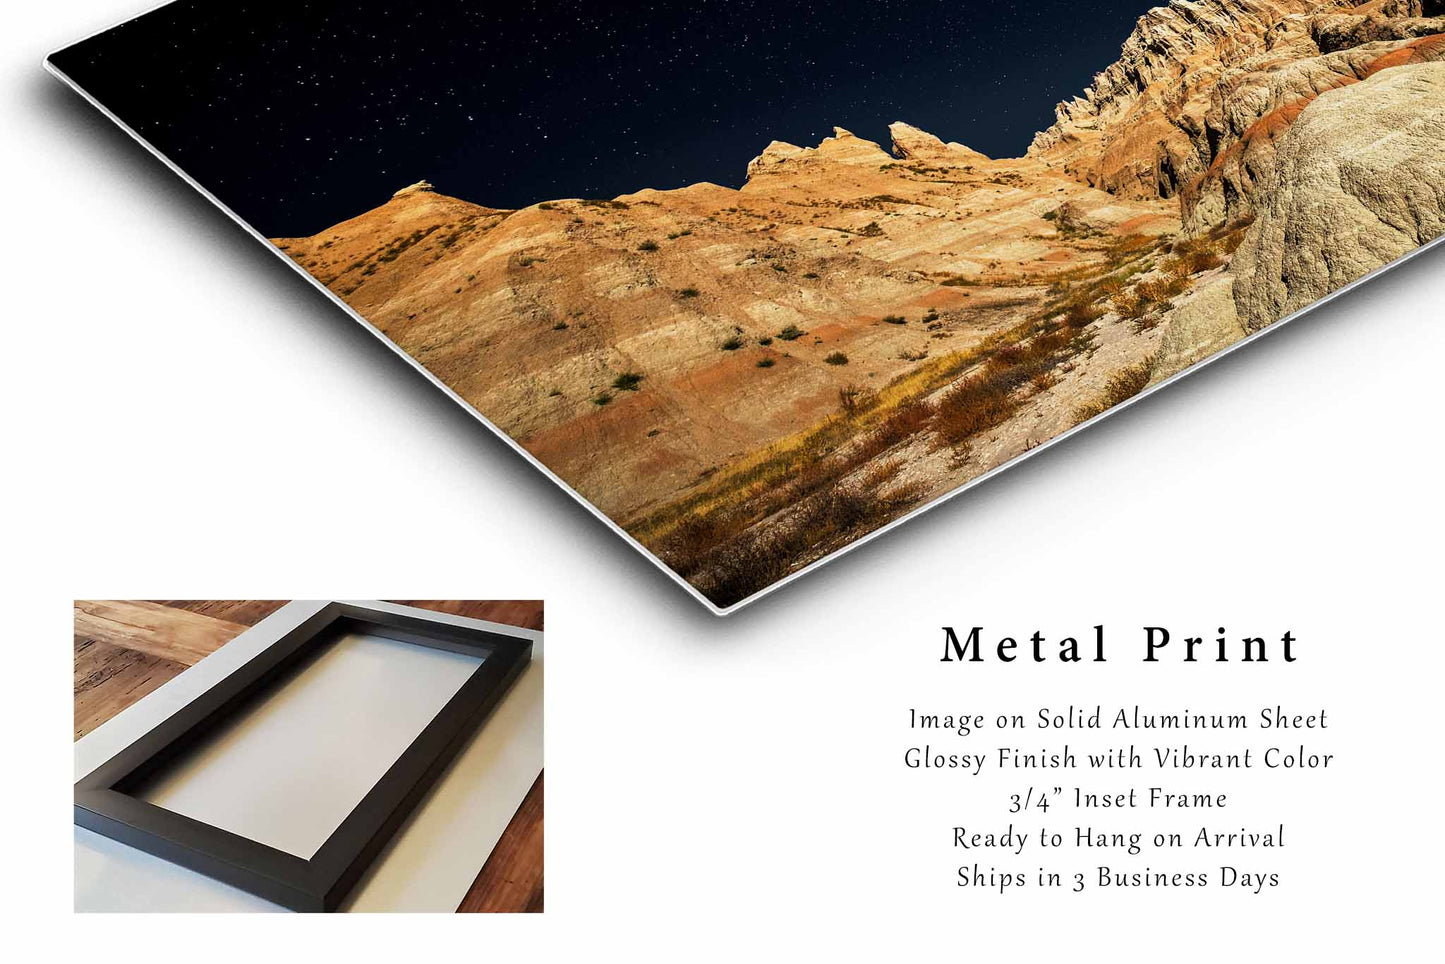 Great Plains Metal Print (Ready to Hang) Photo on Aluminum of Starry Night Sky Over Pinnacles in Badlands National Park South Dakota Western Wall Art Nature Decor